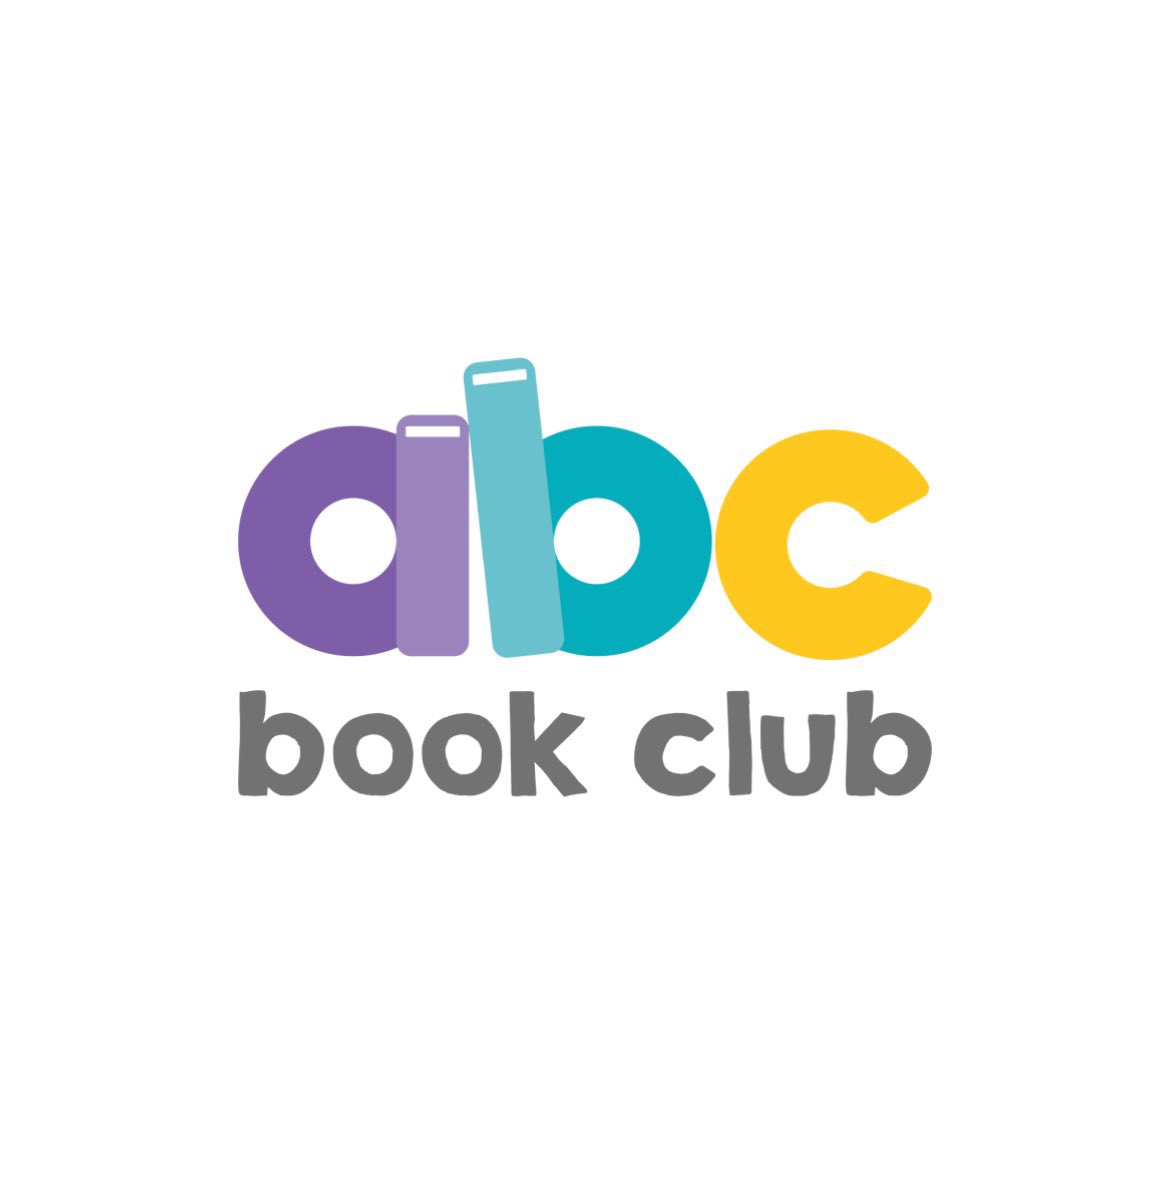 Do you have lots of books that you’ve outgrown? Donate them! Are your shelves full of books that you’ve already read? Swap them! On Saturday 13th April, we’ll also be joined by @abcbookclubuk. Pop by after watching one of our children’s events and bring a book to swap 📖